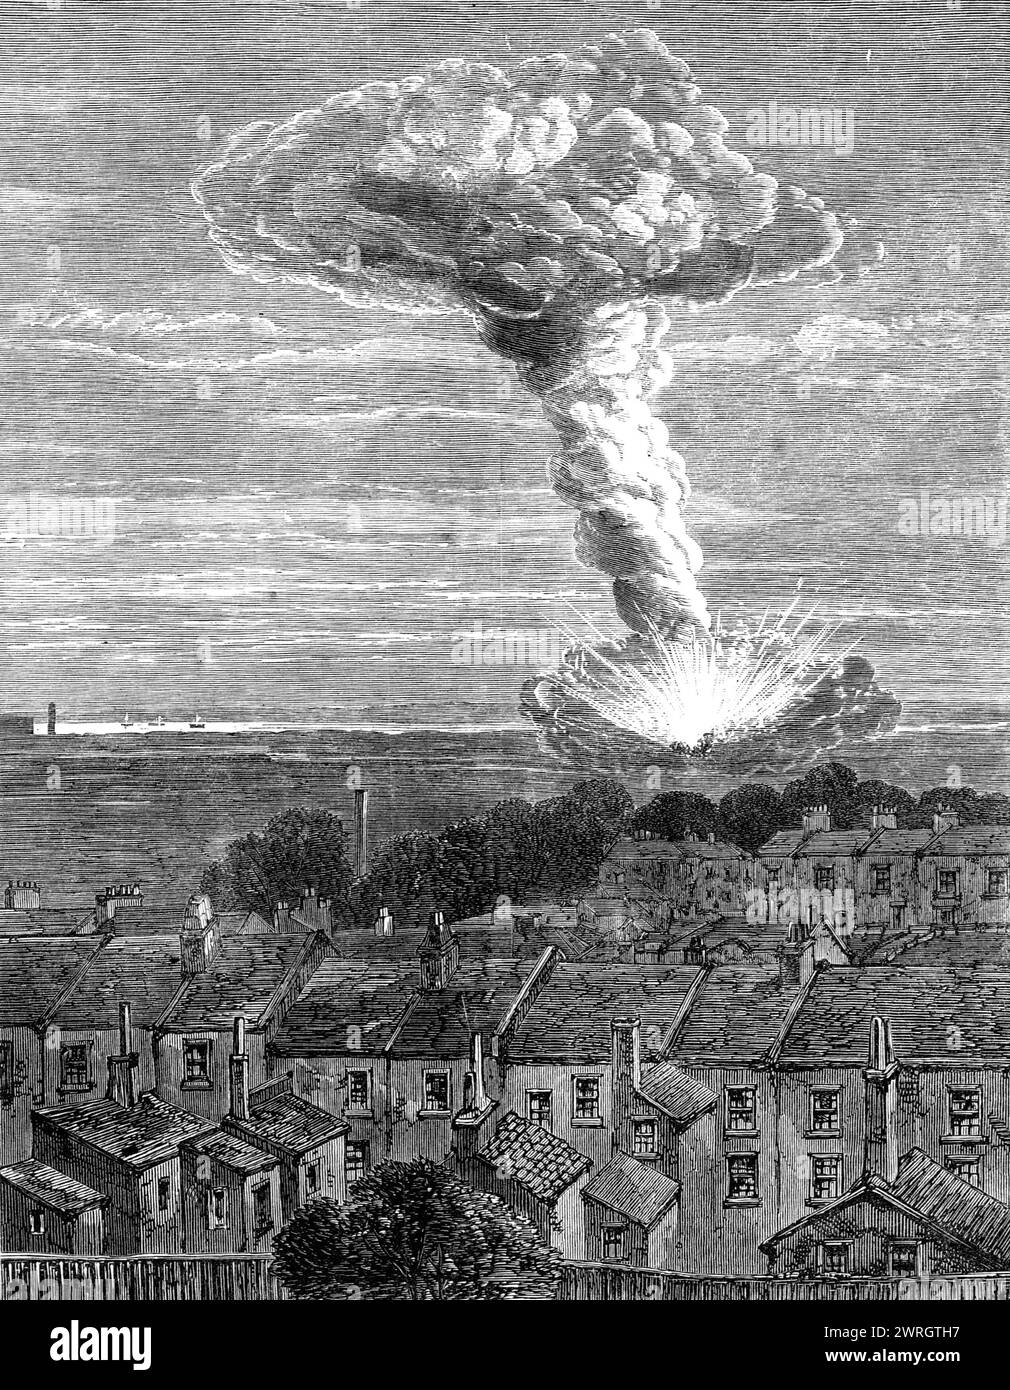 The explosion of gunpowder magazines at Erith: view from Burrage-road, Plumstead, by Captain Pasley, R.A., 1864. View from the window of Pasley's house. 'The main drainage outfall works at Crossness are shown to the left hand...two gunpowder magazines... exploded with terrific violence, killing eight or nine persons, if not more, wounding others, and carrying consternation and alarm among the inhabitants for miles round...The explosion occurred in a gunpowder depot belonging to Messrs. John Hall and Sons, and almost simultaneously in a magazine of smaller size used by the Low Wood Gunpowder Co Stock Photo